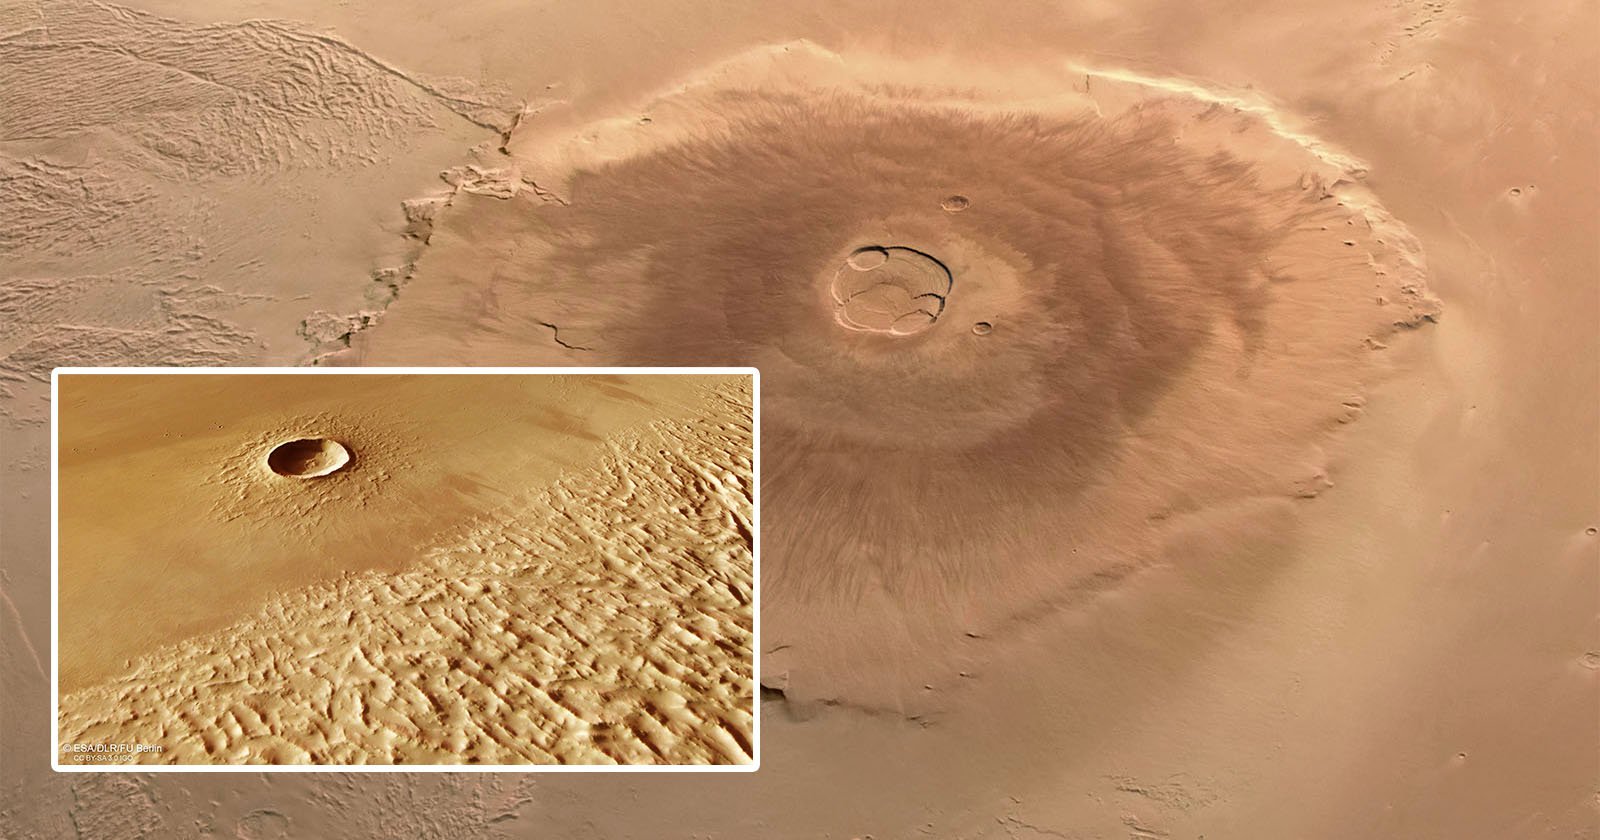 Mars Express provides incredible images of the Olympus Mons